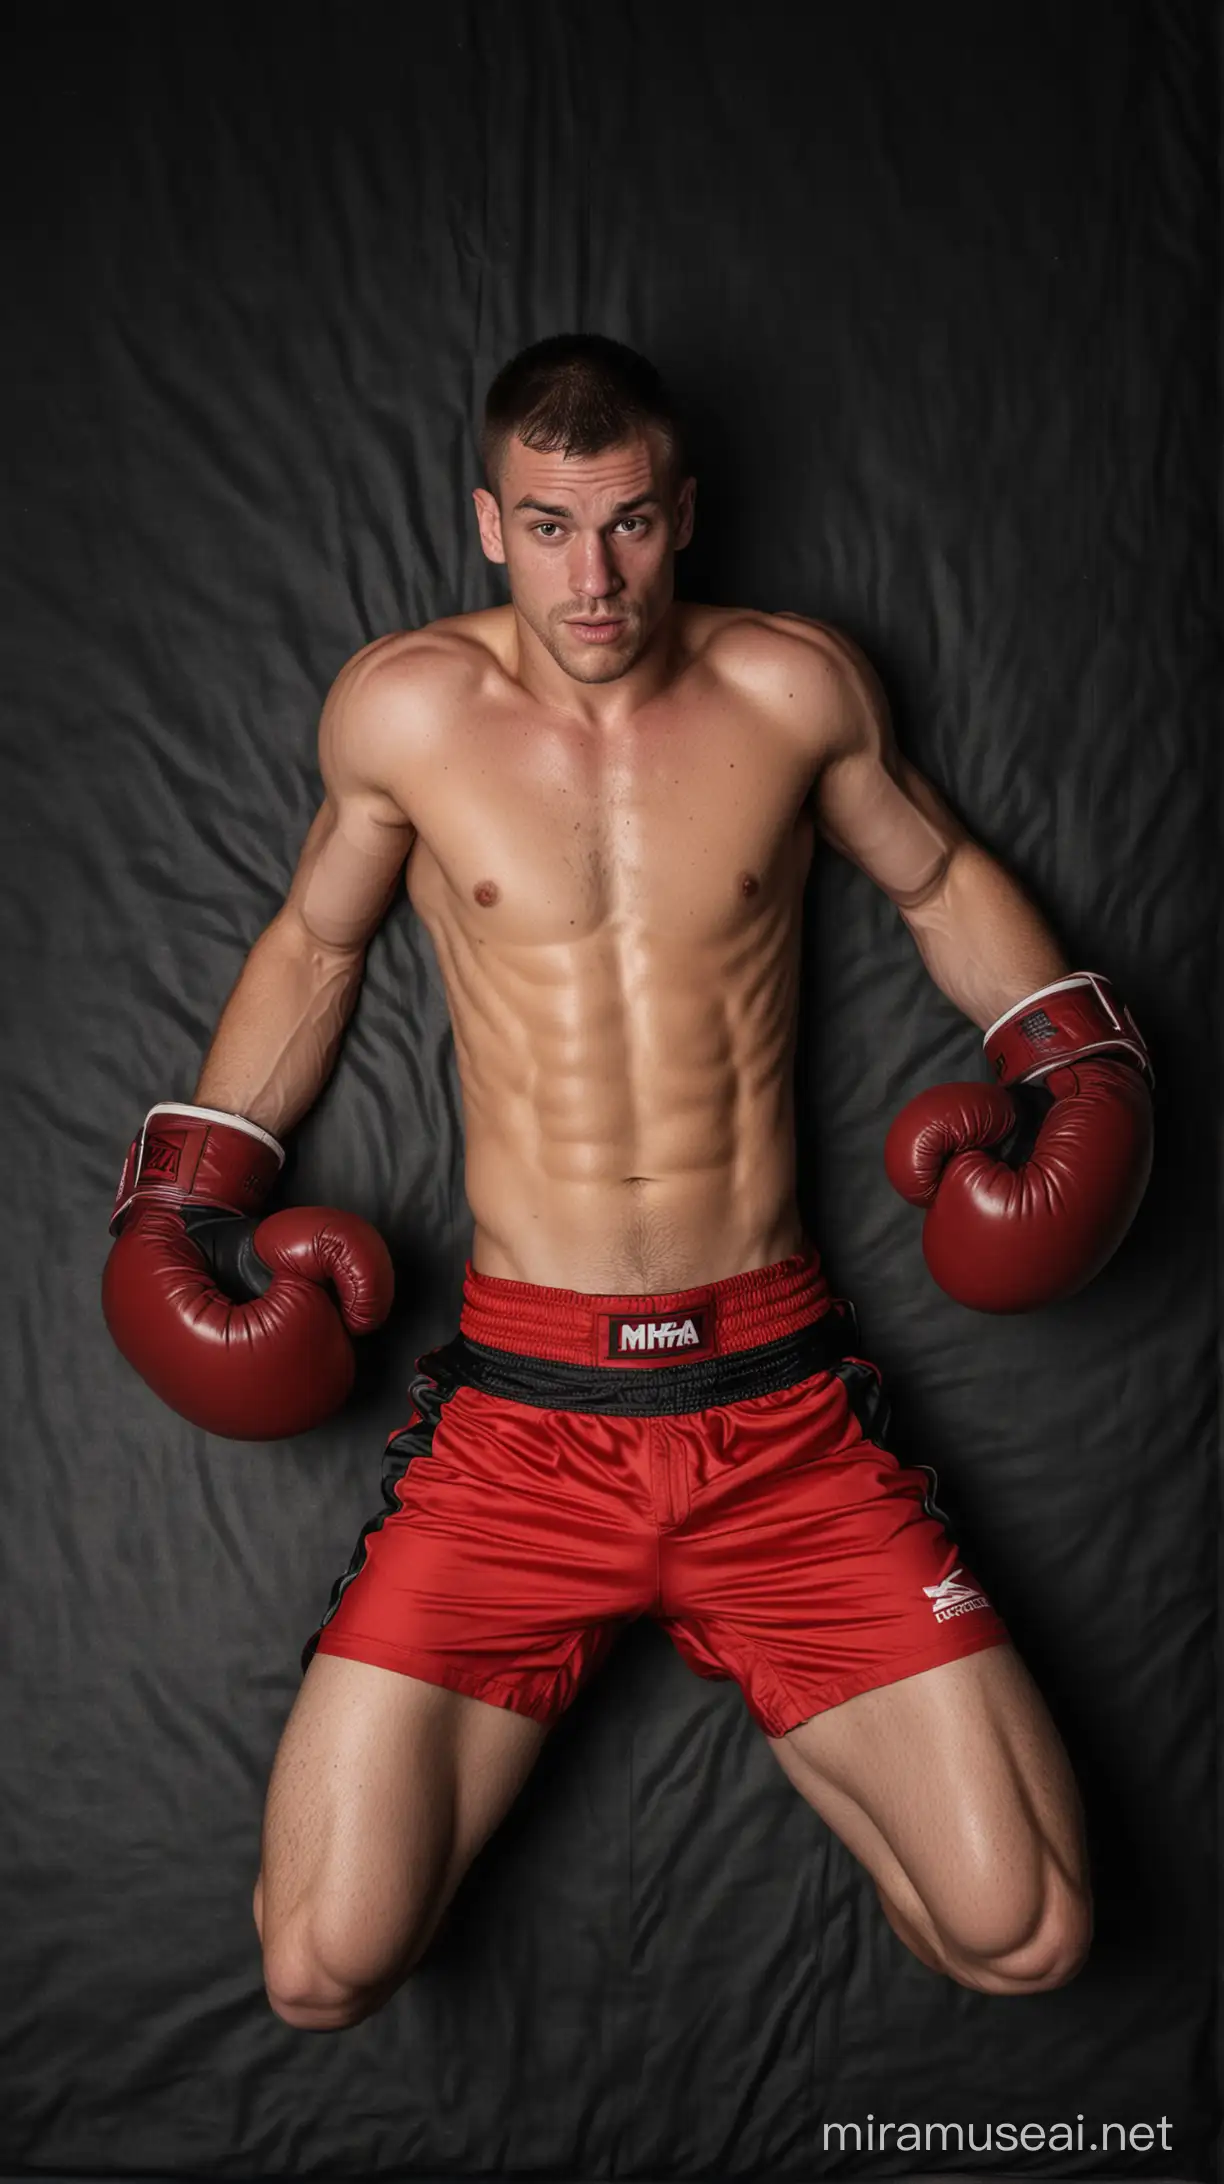 MMA Boxer Knocked Out on Pillows in Red Shorts on Black Background